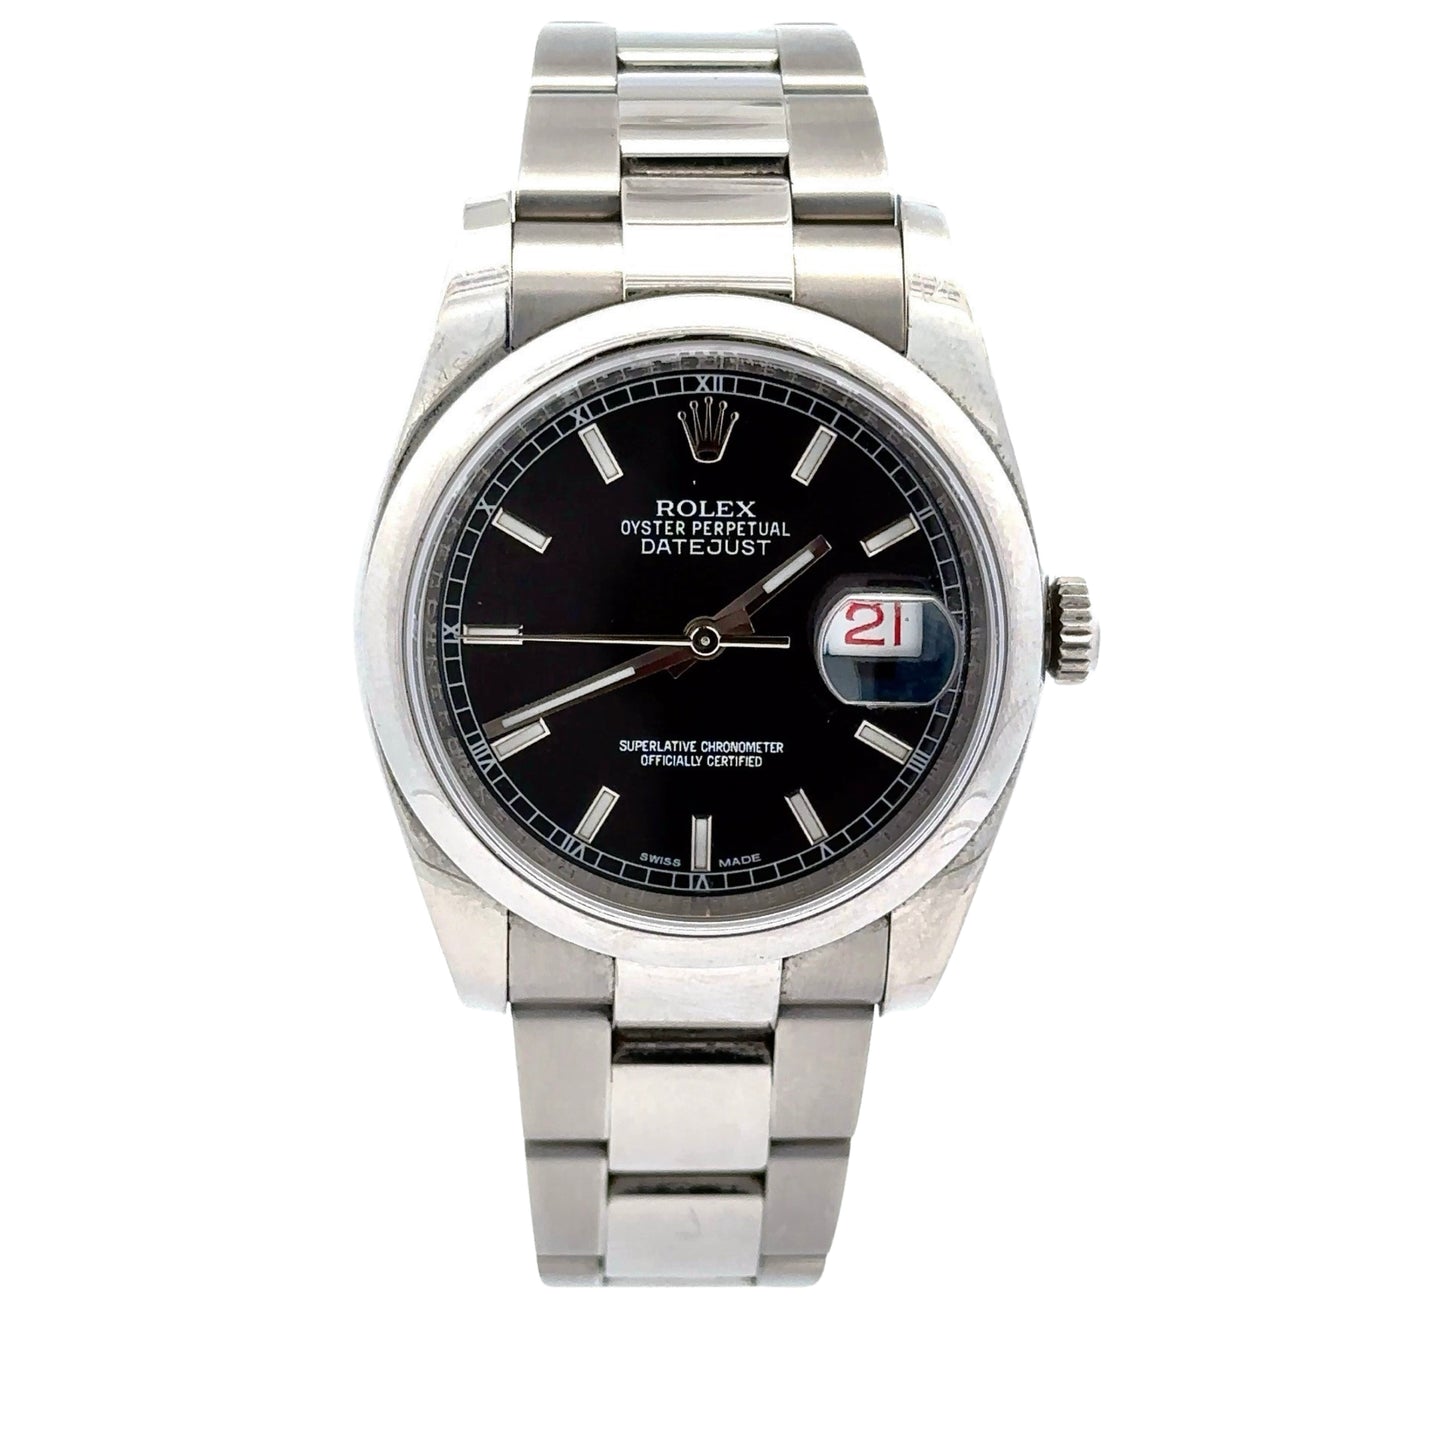 Rolex Datejust with black dial and red font window box and stainless steel case and band. White luminous hour markers on the dial. Scratches on case and band.